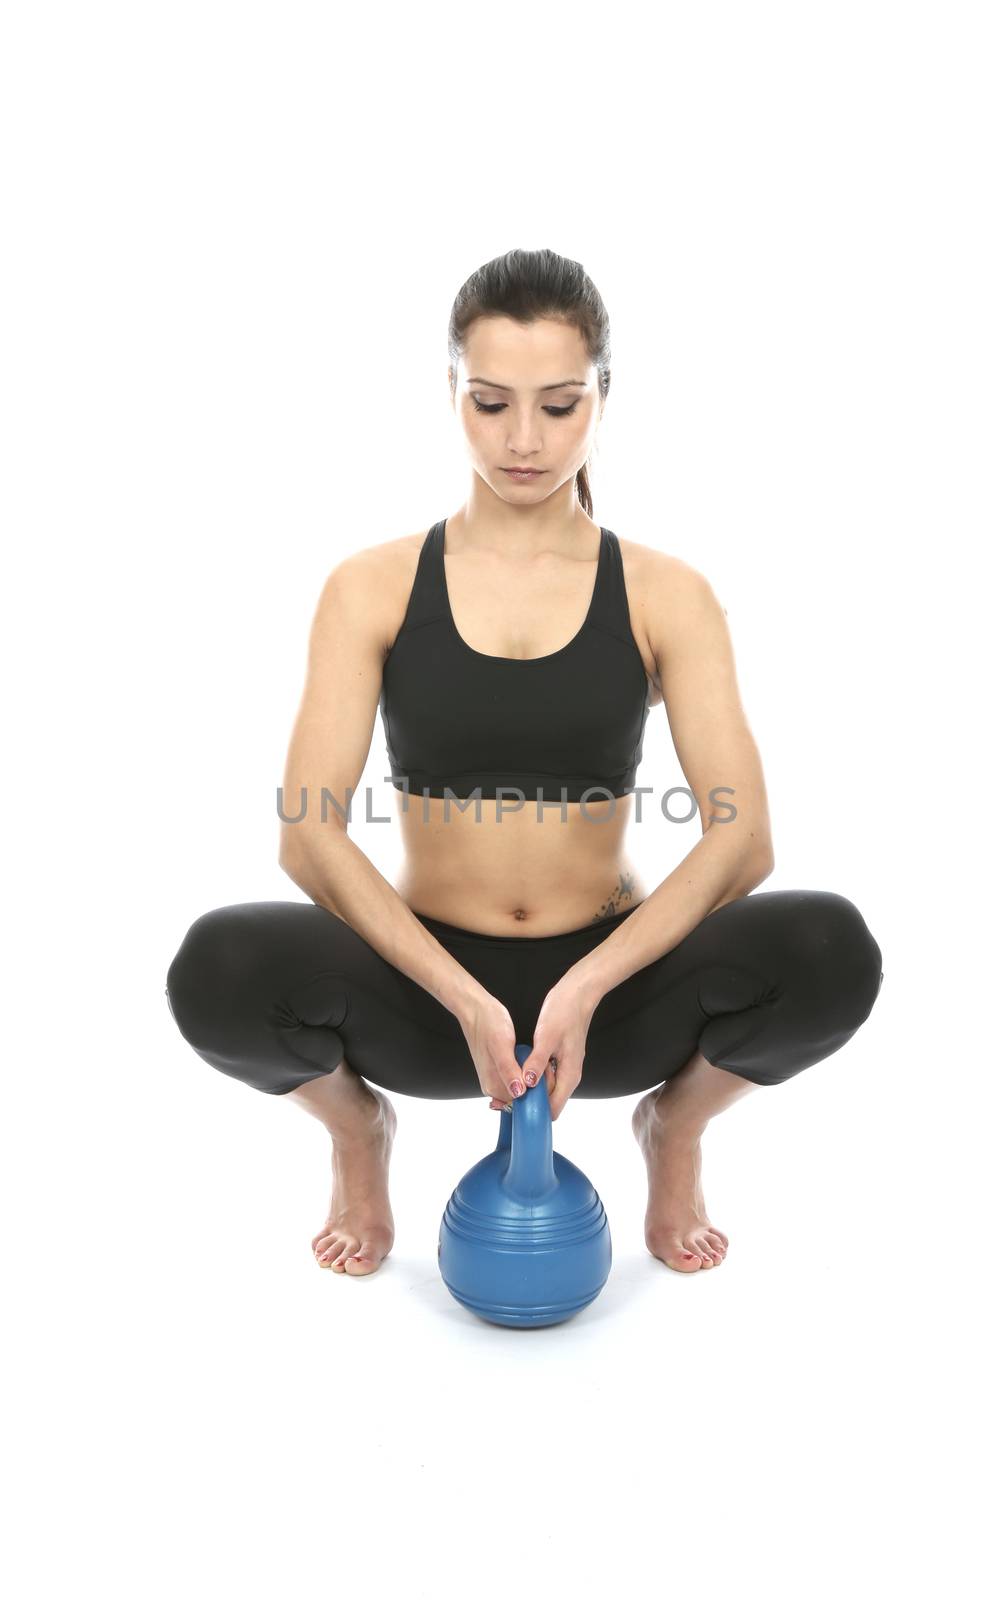 Model Released.  Woman Exercising